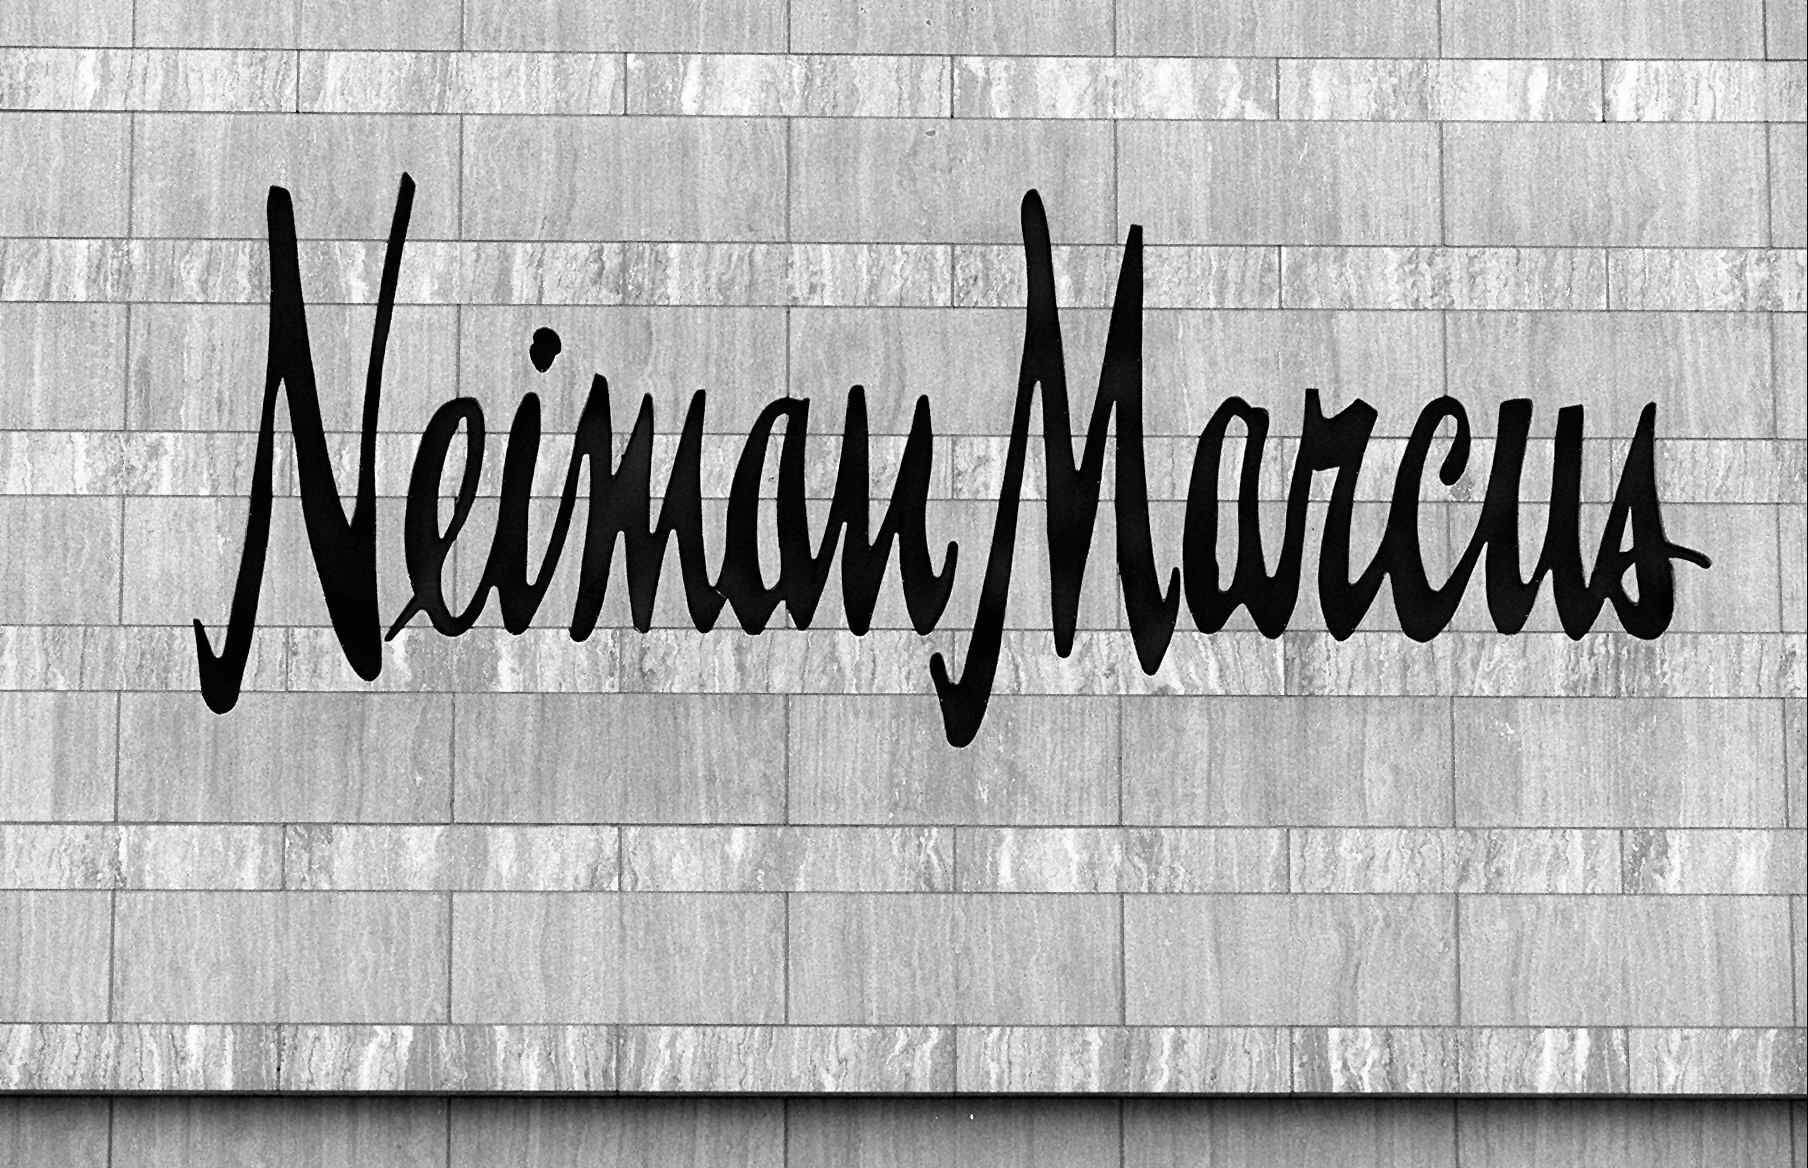 Neiman Marcus to file for bankruptcy amid coronavirus pandemic